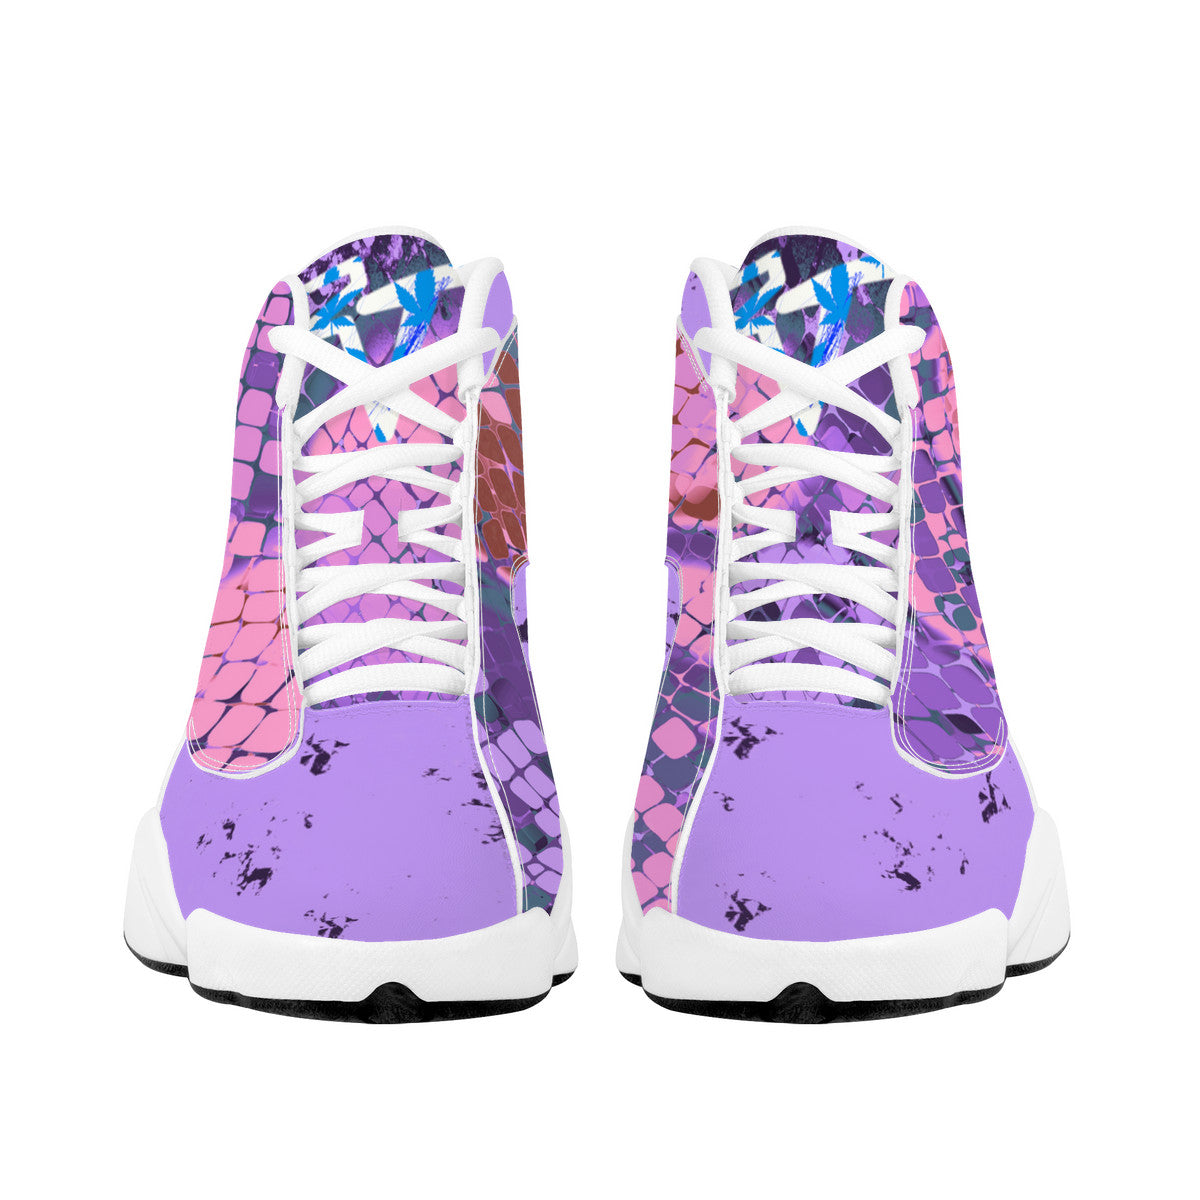 RVT Basketball Shoes - Purple Scales